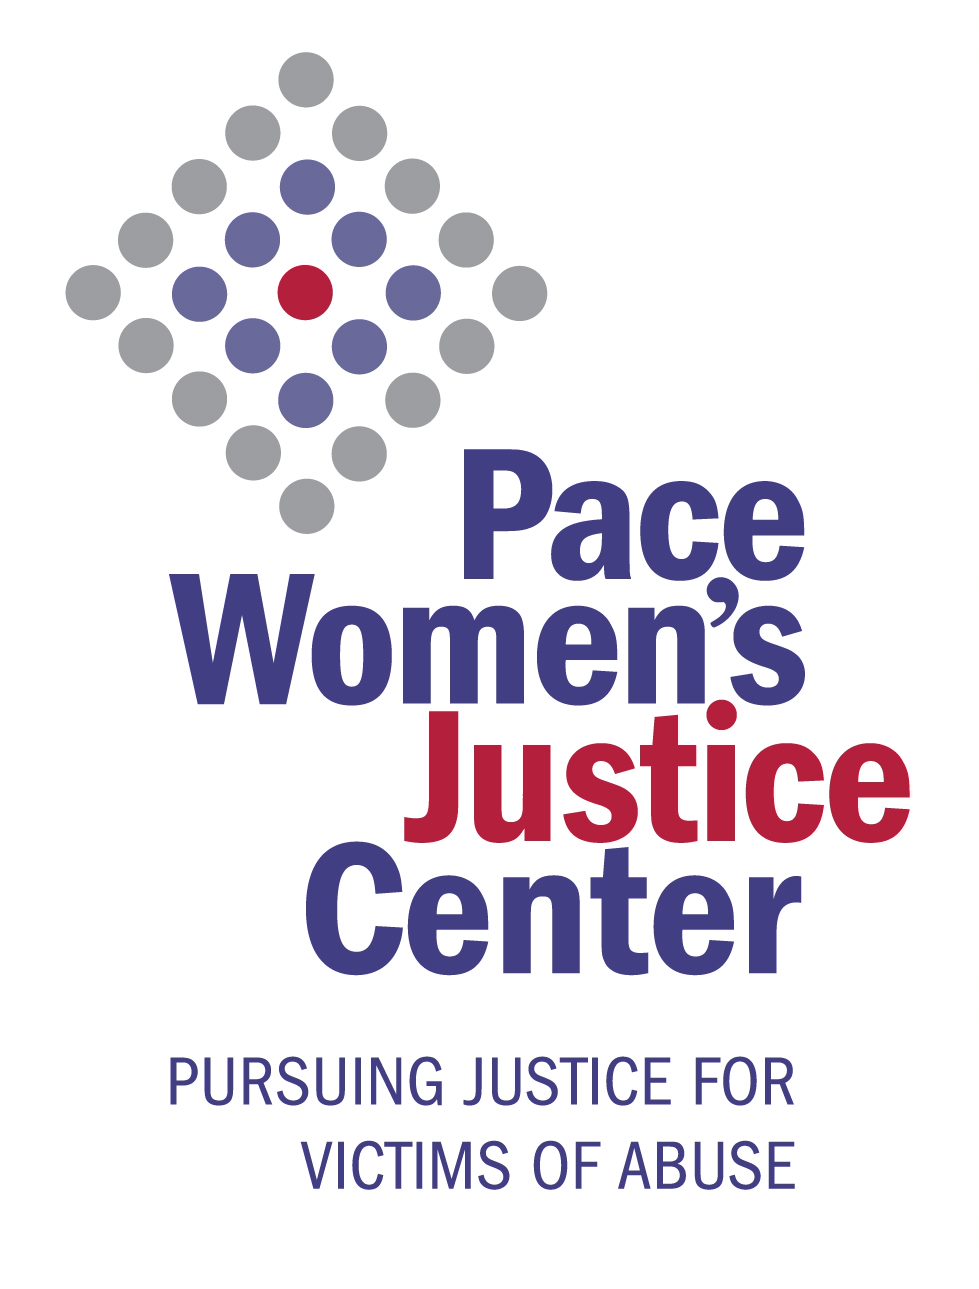 Pace Women's Justice Center